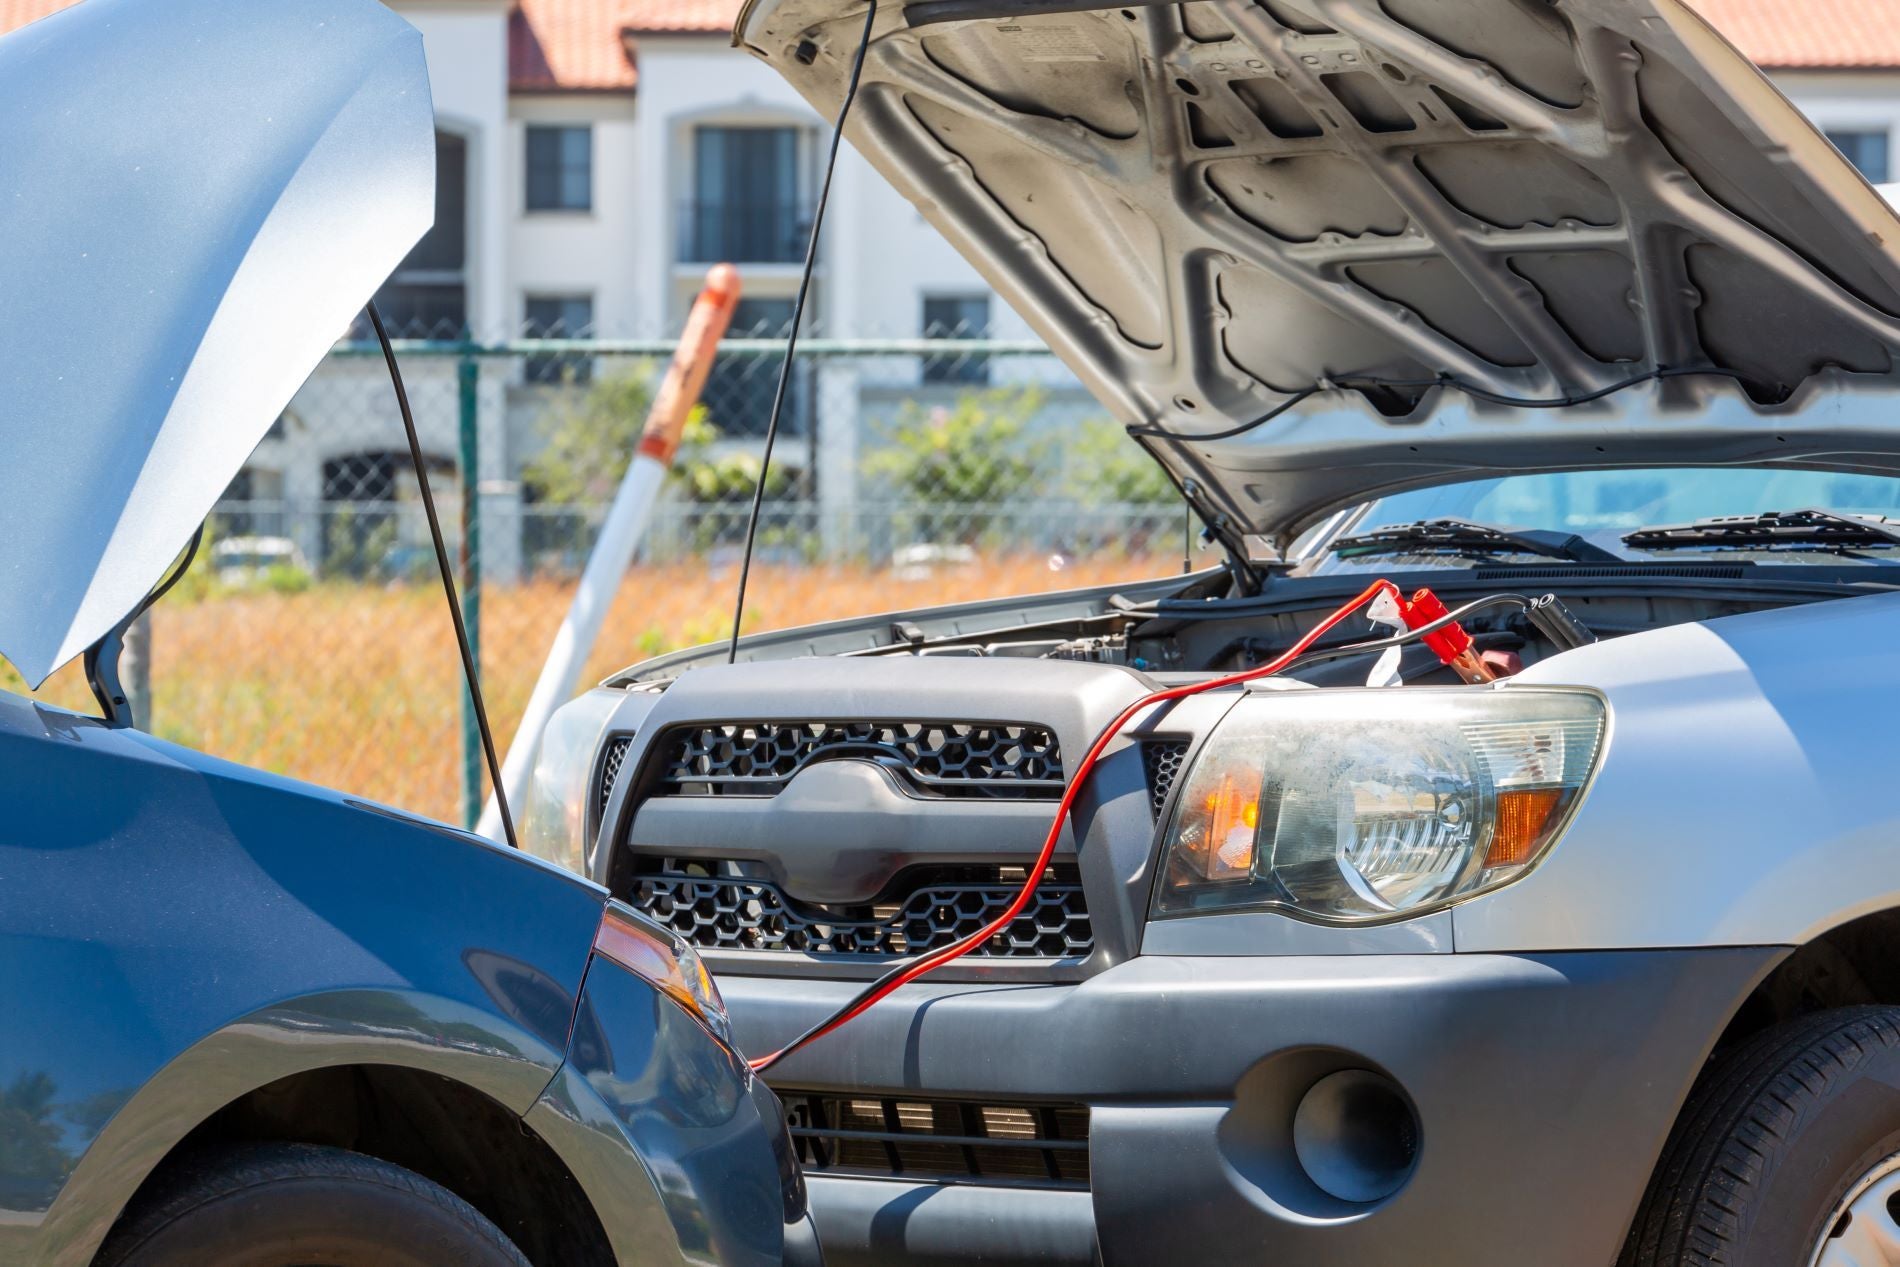 A demonstration of how to jump start a car, One must connect to the dead car battery connecting to a dead battery's positive terminal and negative terminal. 